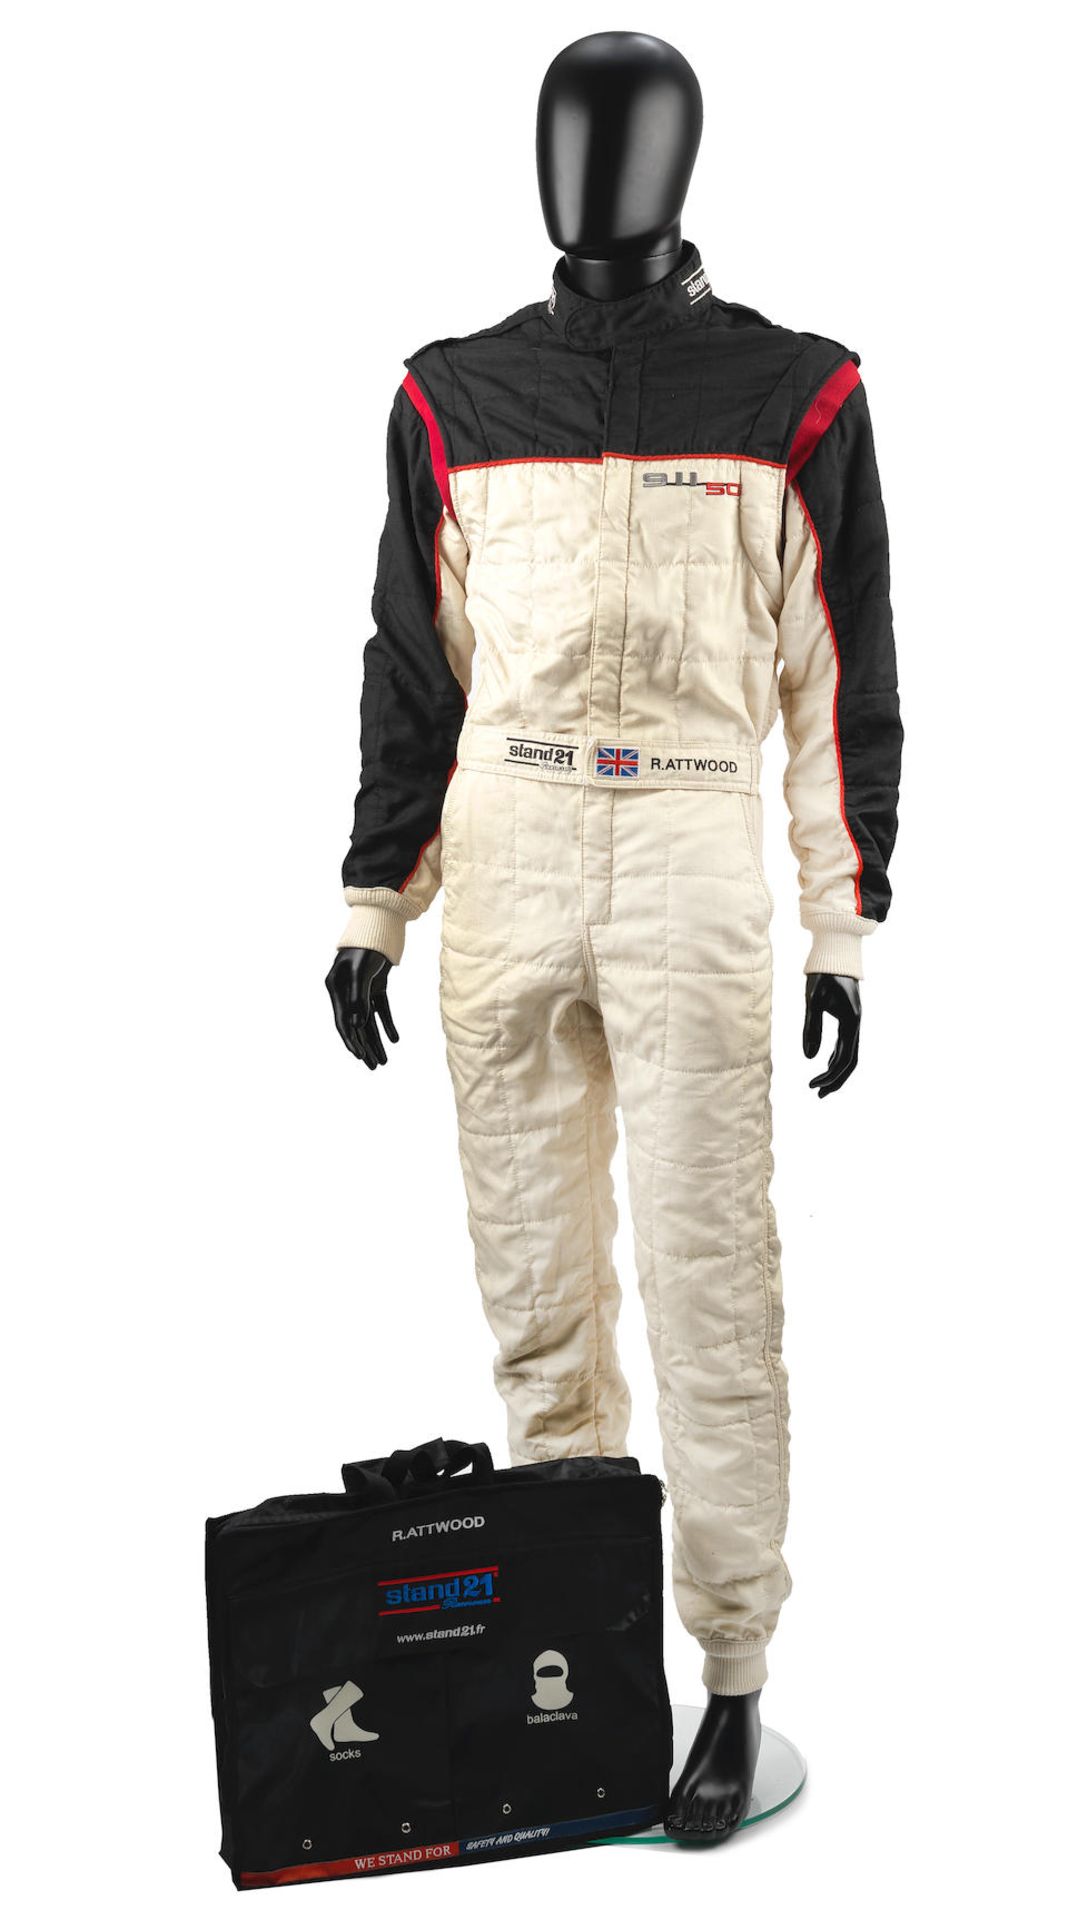 A set of Richard Attwood's Porsche 911 50th Anniversary race overalls by Stand 21, 2013, ((2)) - Image 3 of 3